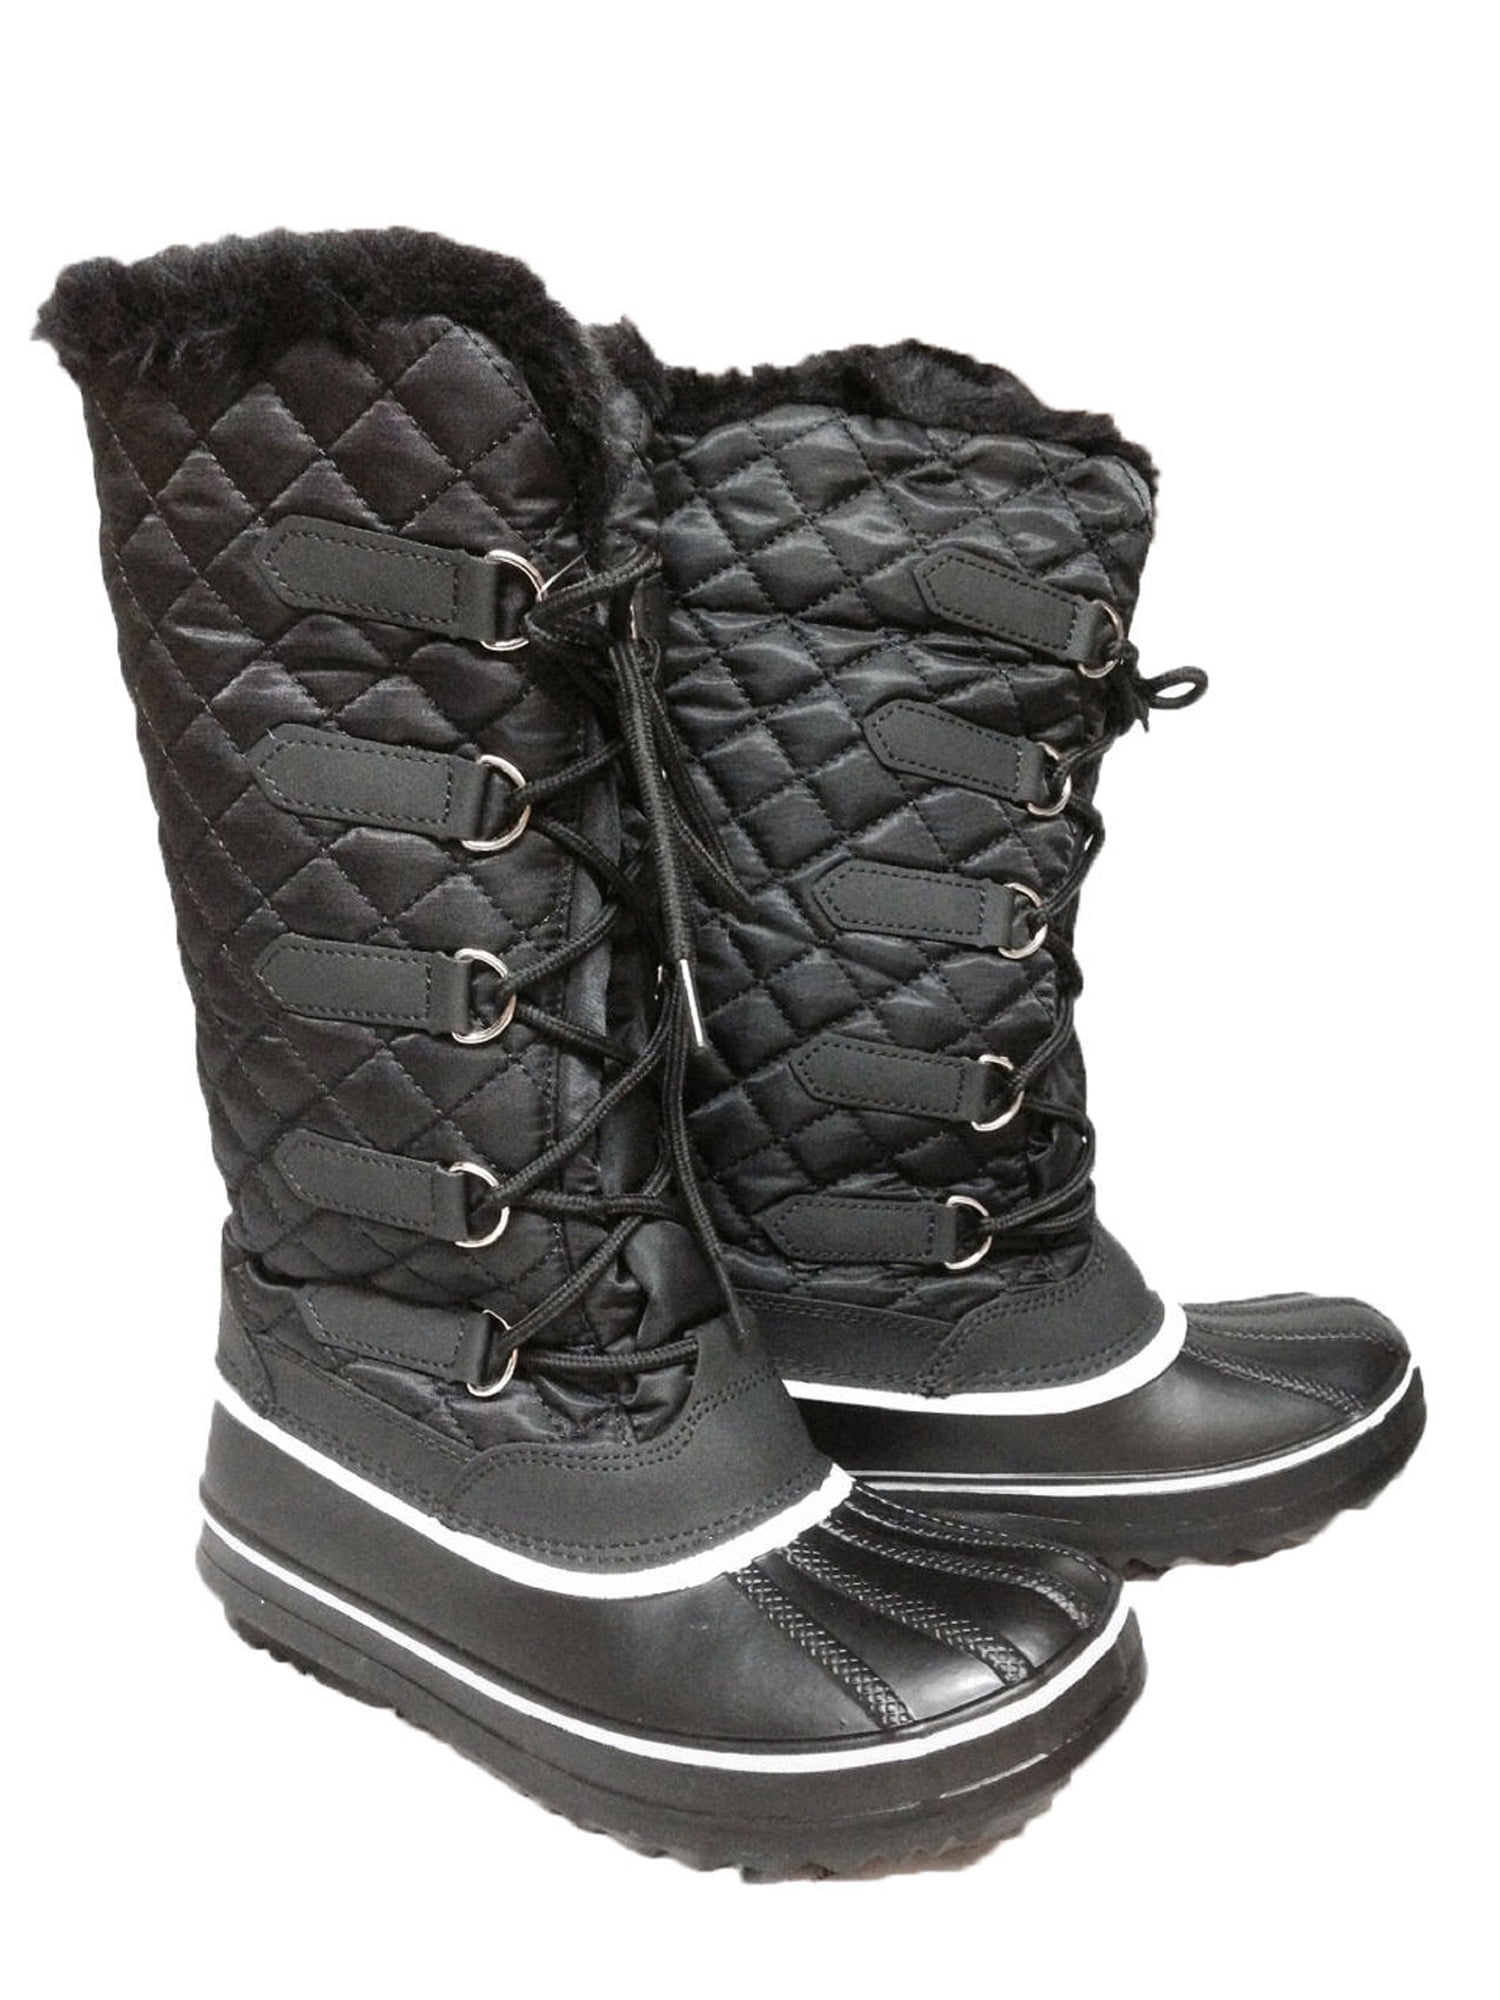 Women's Winter Boots Fur Snow Boots Lined Warm Mid Calf Boots for Outdoor 